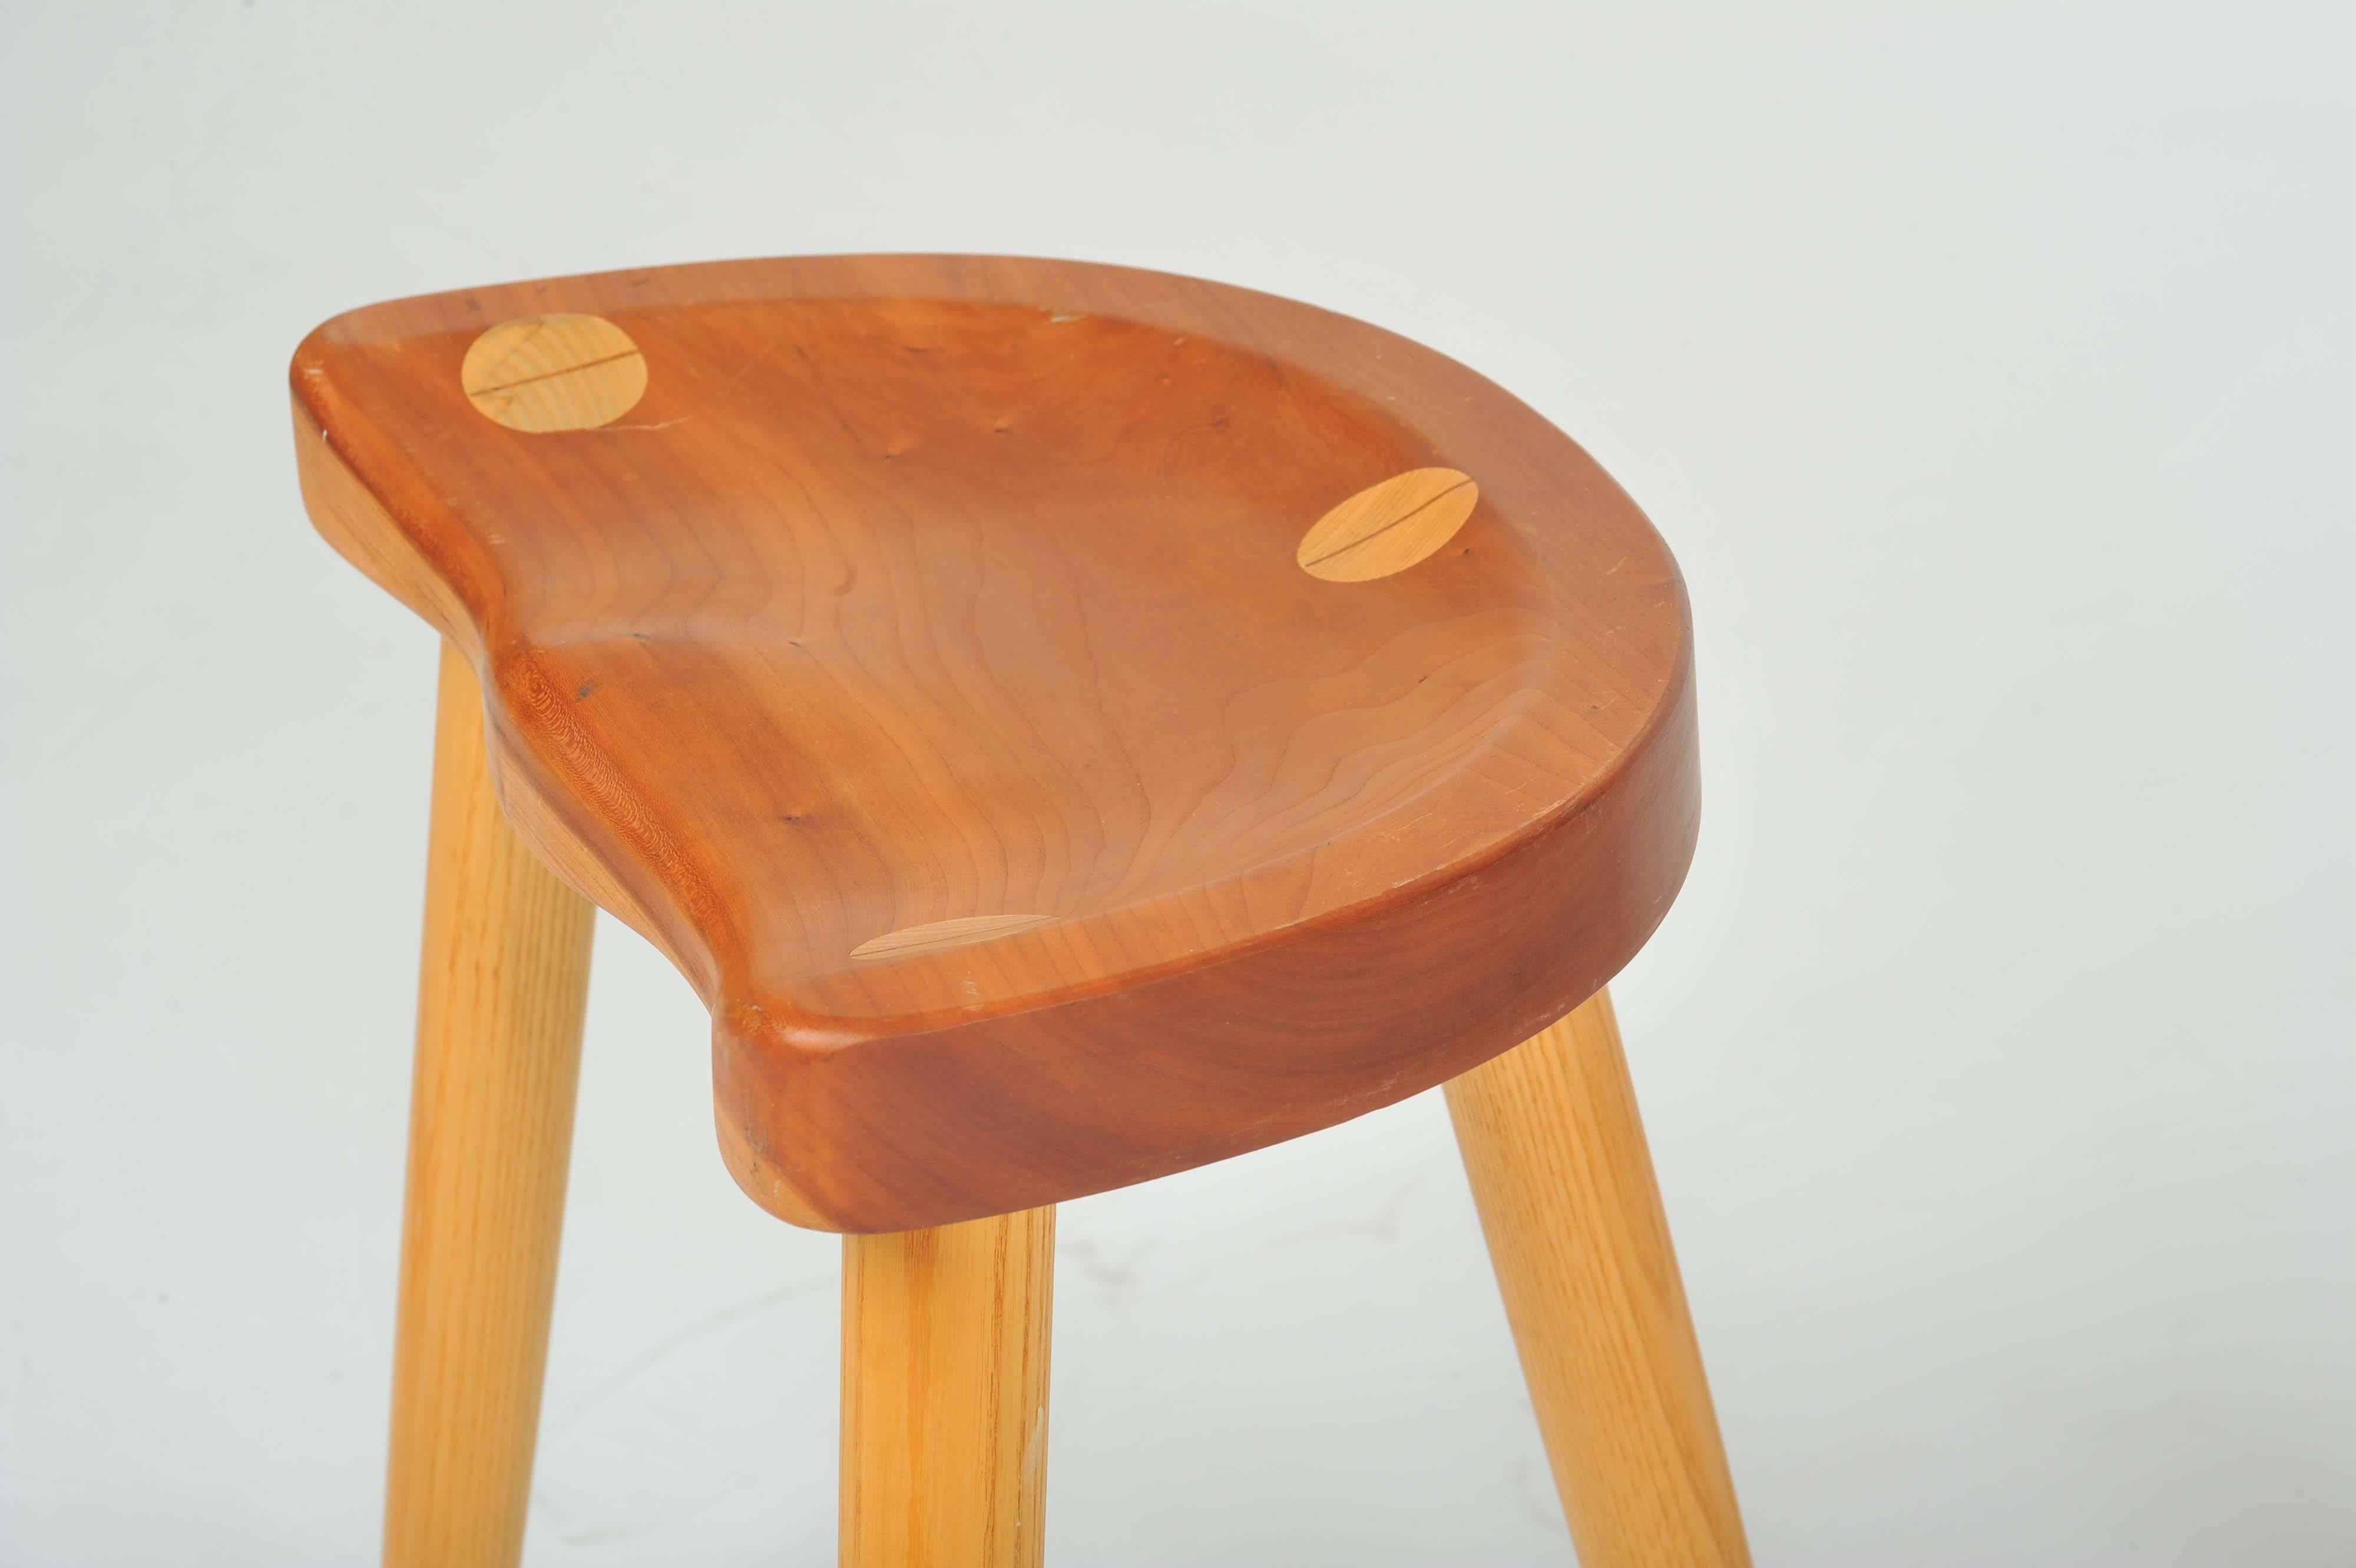 North American Handcrafted Tripod Studio Stools by Robert Roakes